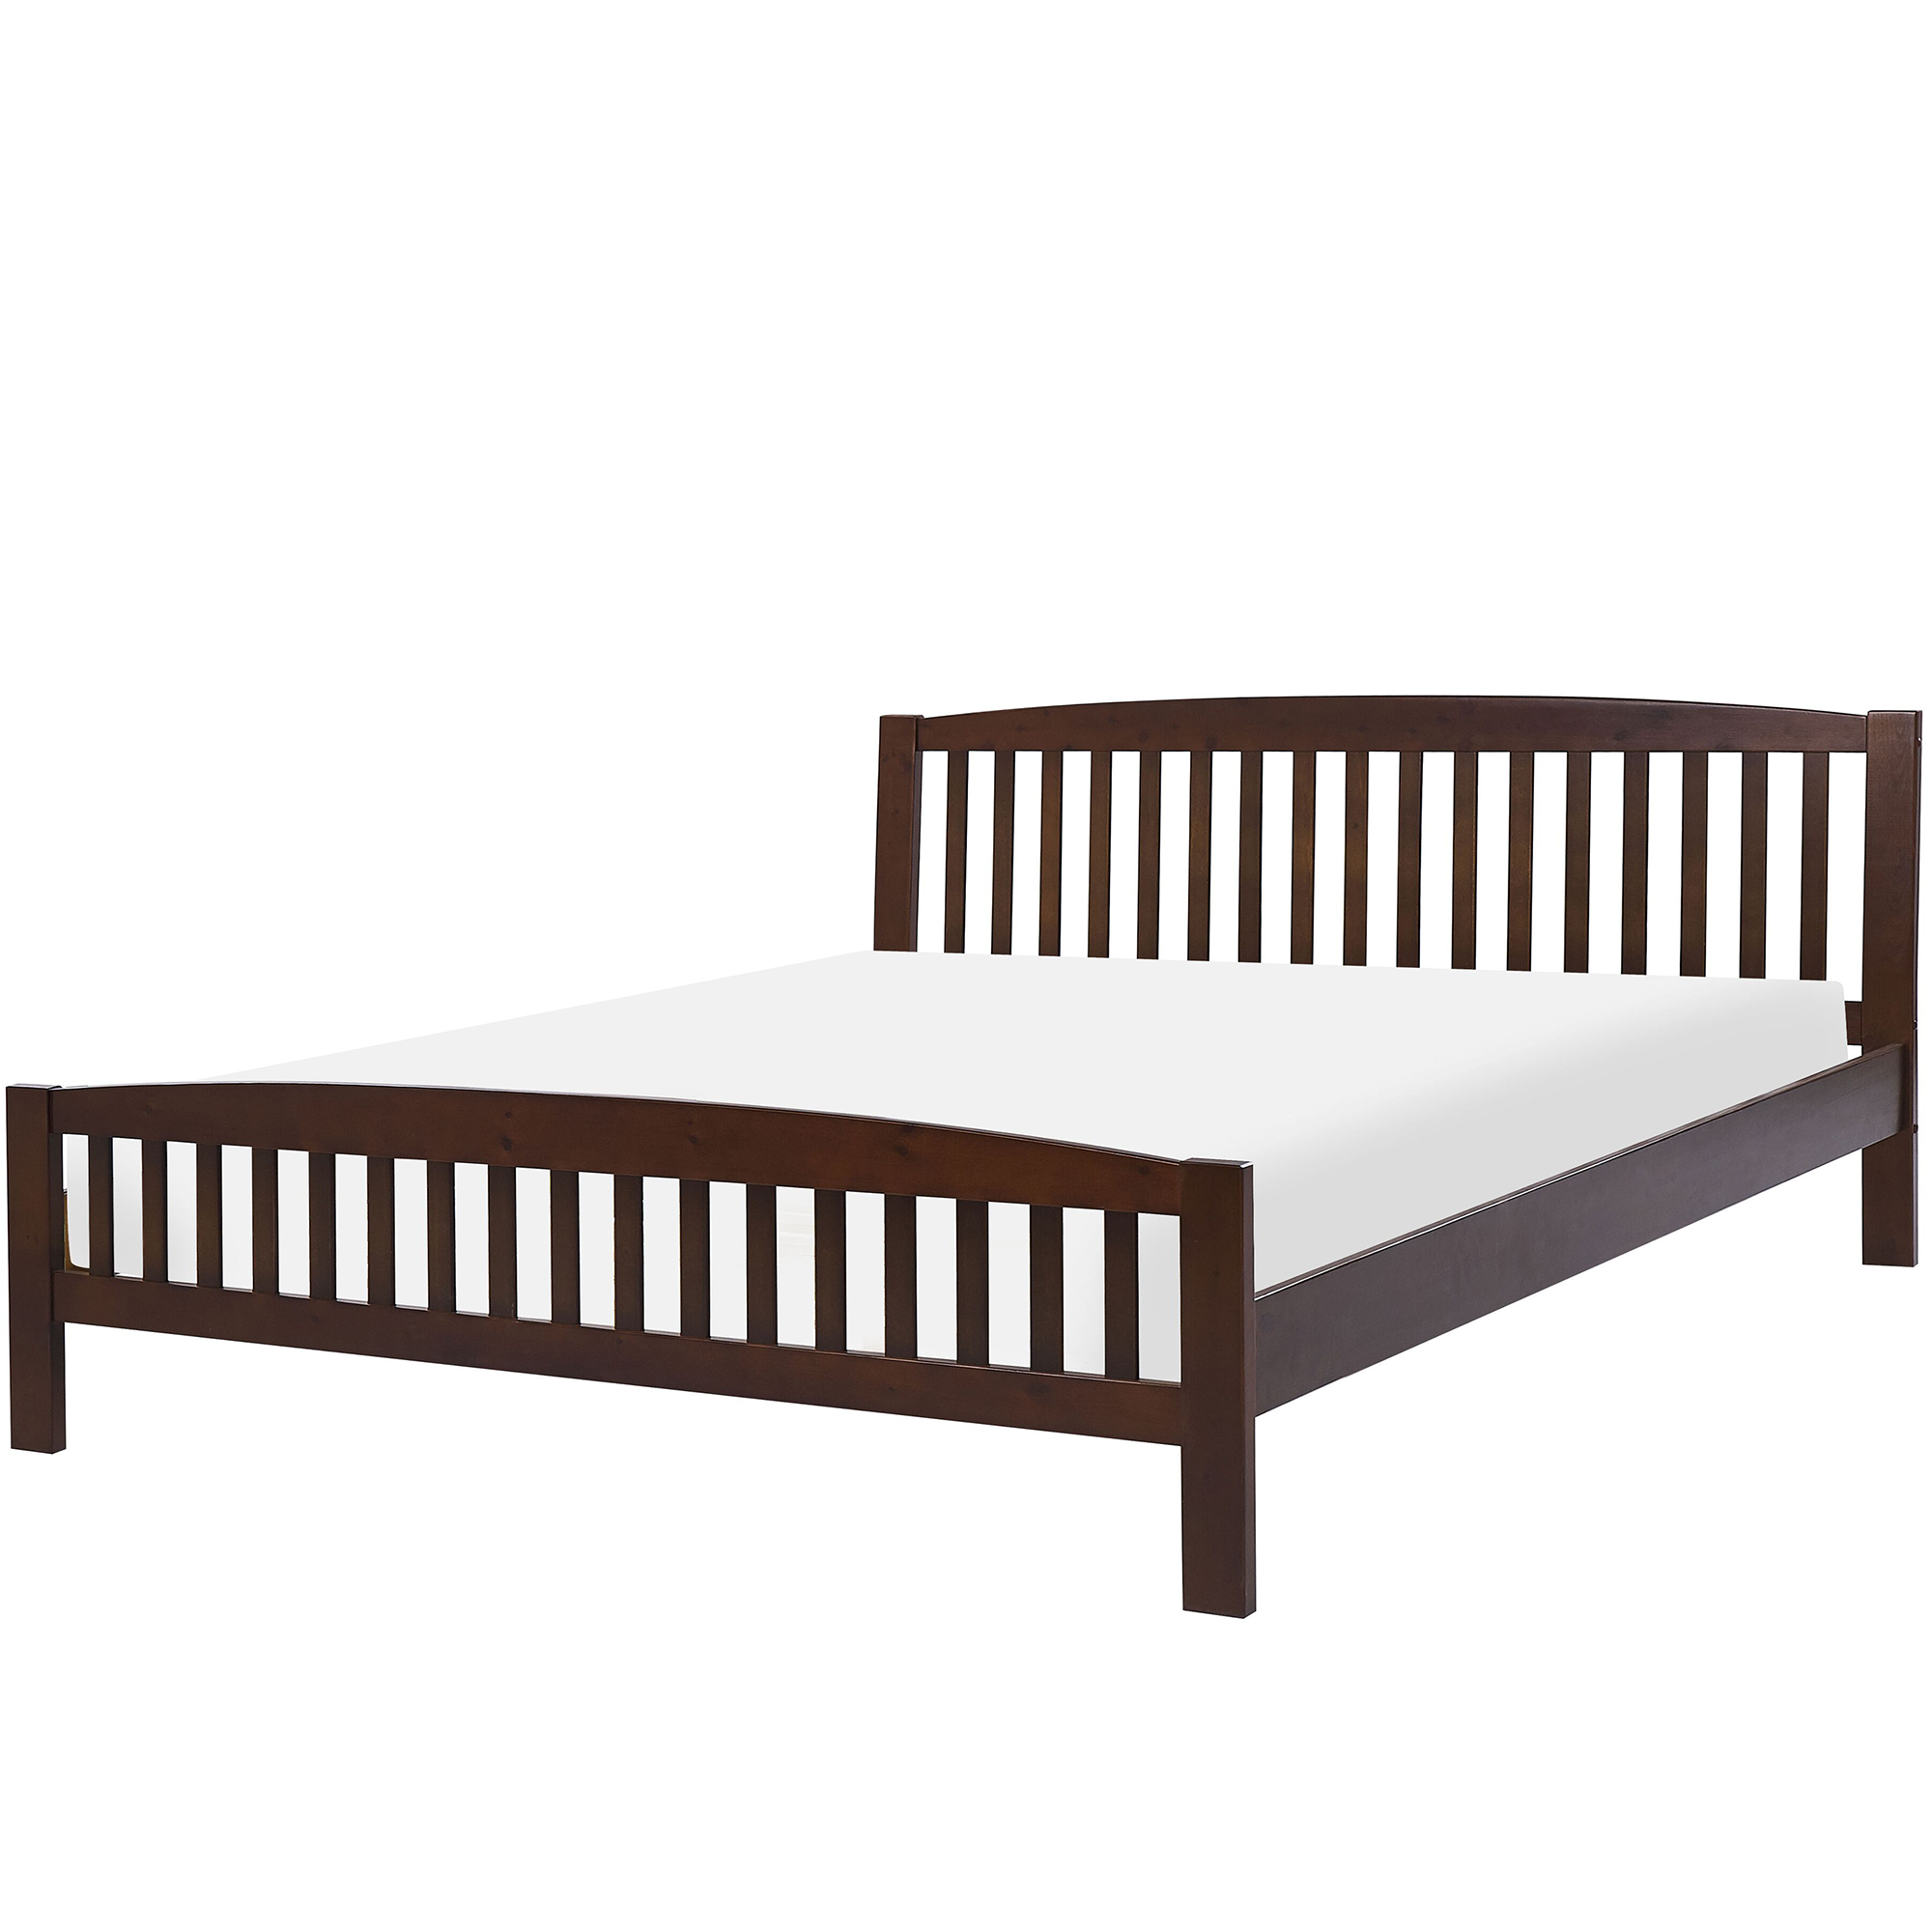 BELIANI Bed hout donkerbruin 180 x 200 cm CASTRES